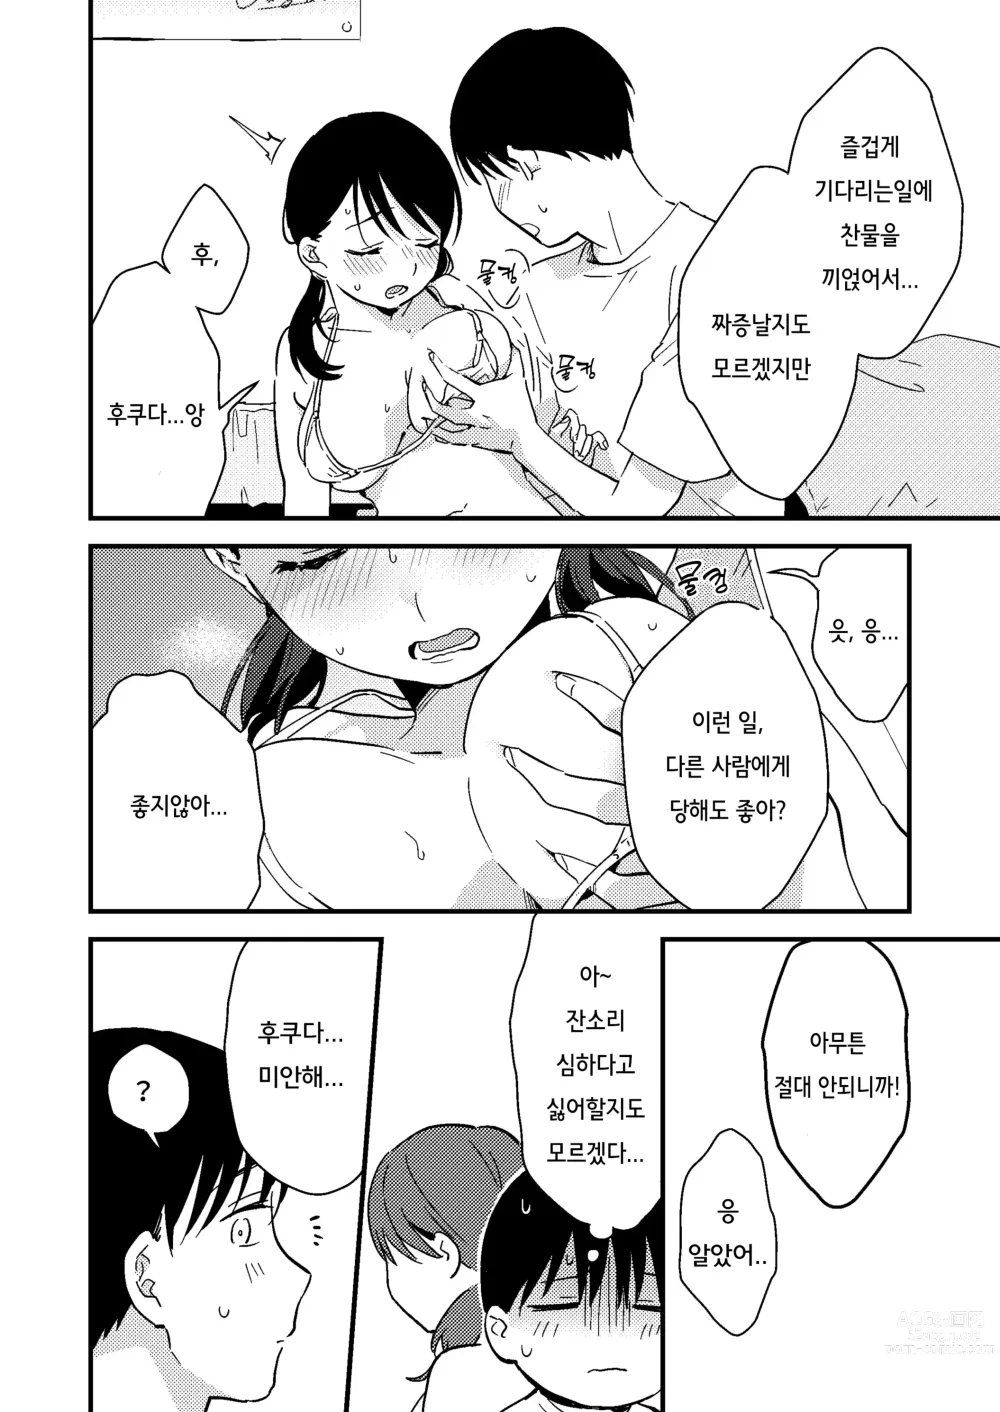 Page 8 of doujinshi 핑계 대는 여 자친구